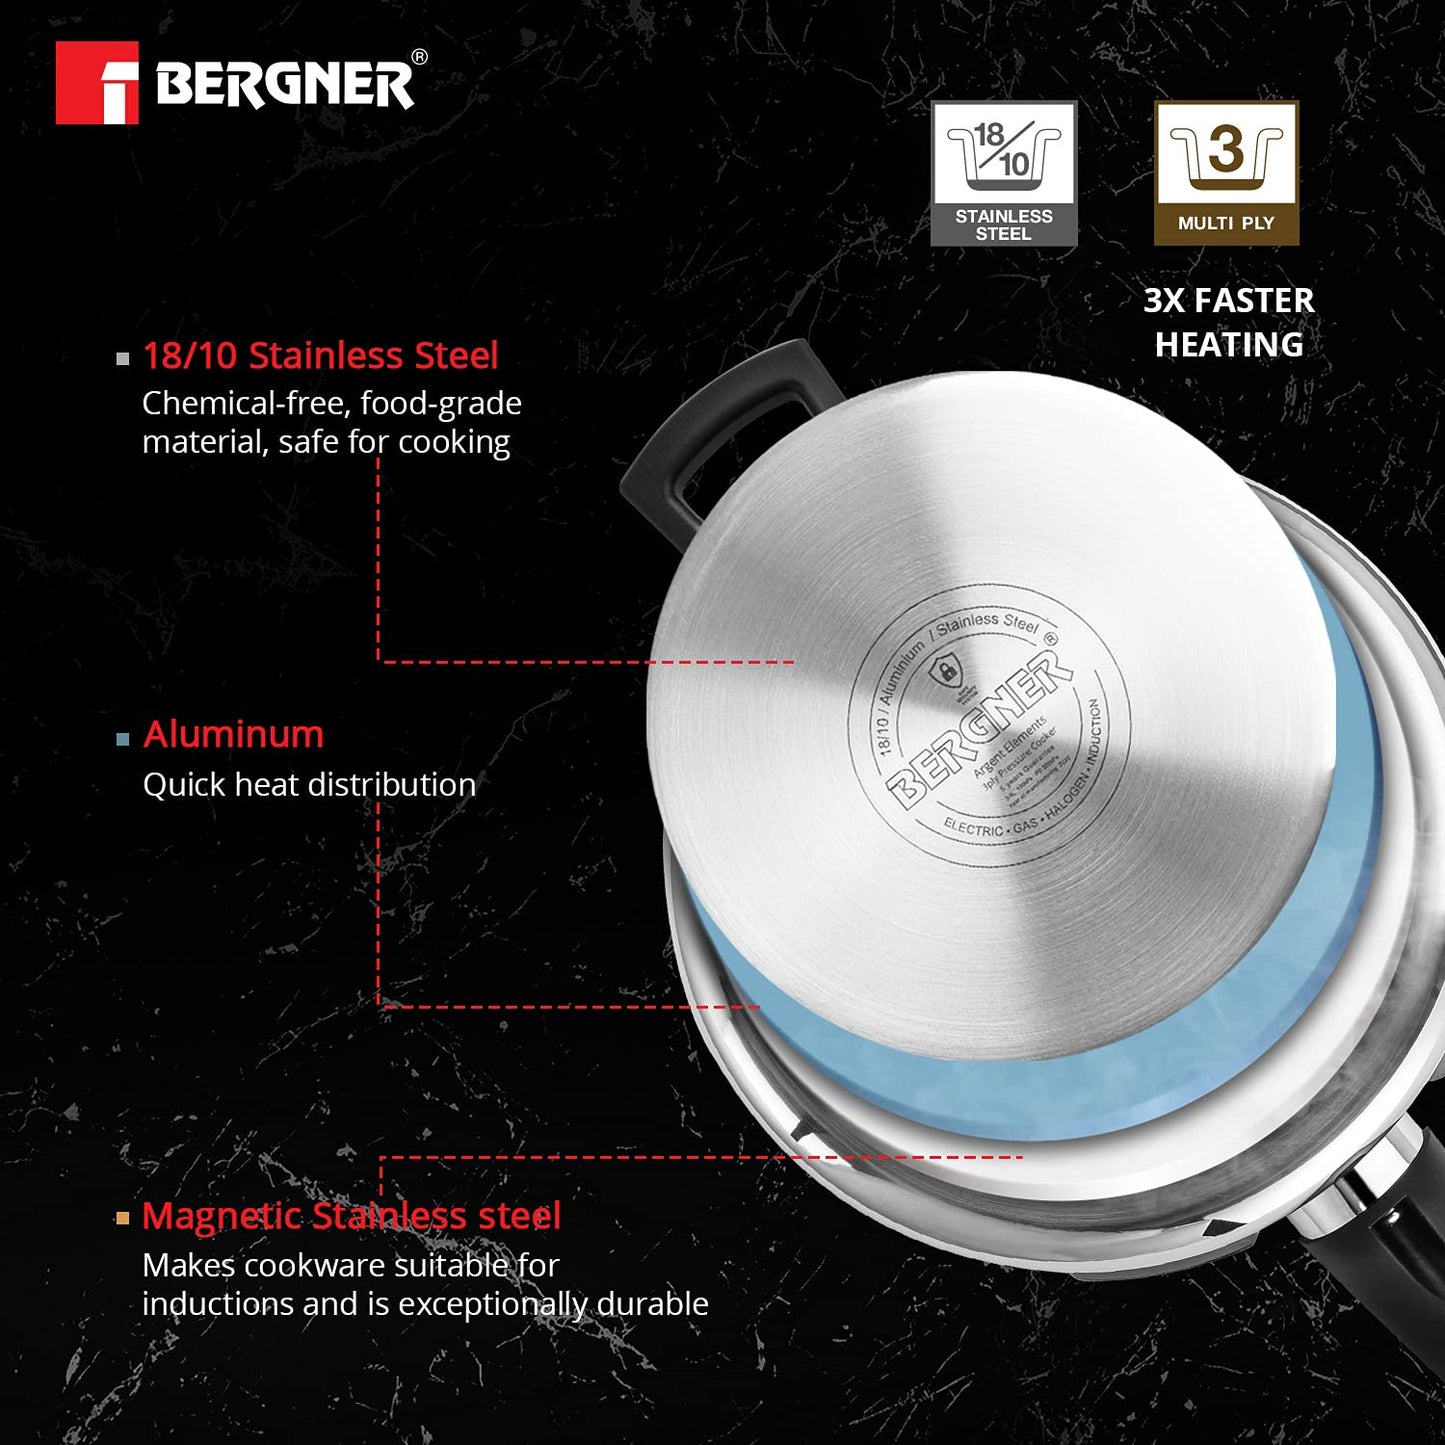 Bergner Argent Elements Tri-Ply Stainless Steel Unpressure Cooker With Outer Lid (3.5 Ltrs., Silver), 3.5 Liter